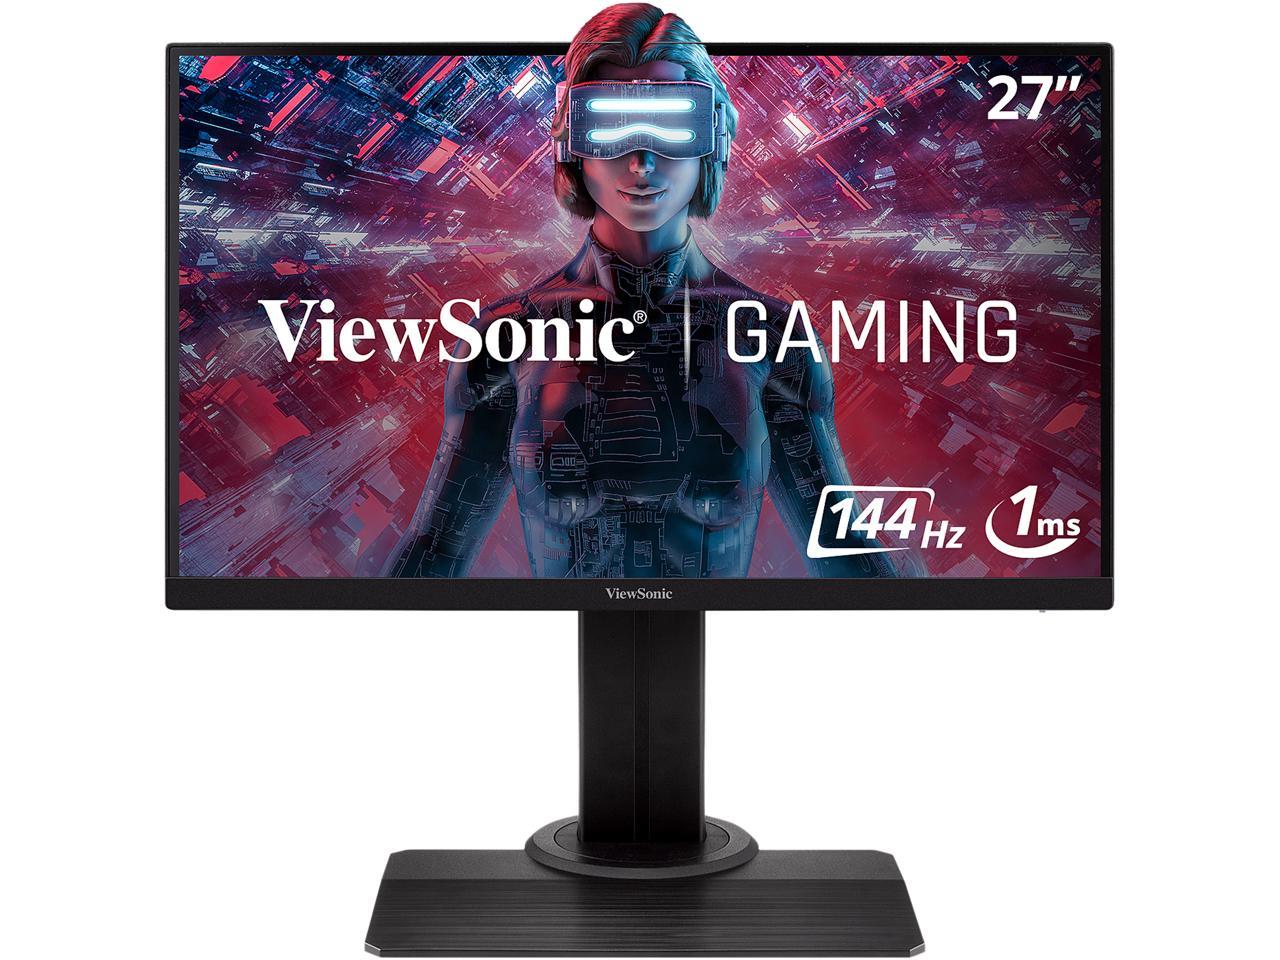 ViewSonic Gaming Monitor blowout sale | 27" IPS 144hz for $200, 27" 2K 144hz for $229, and more